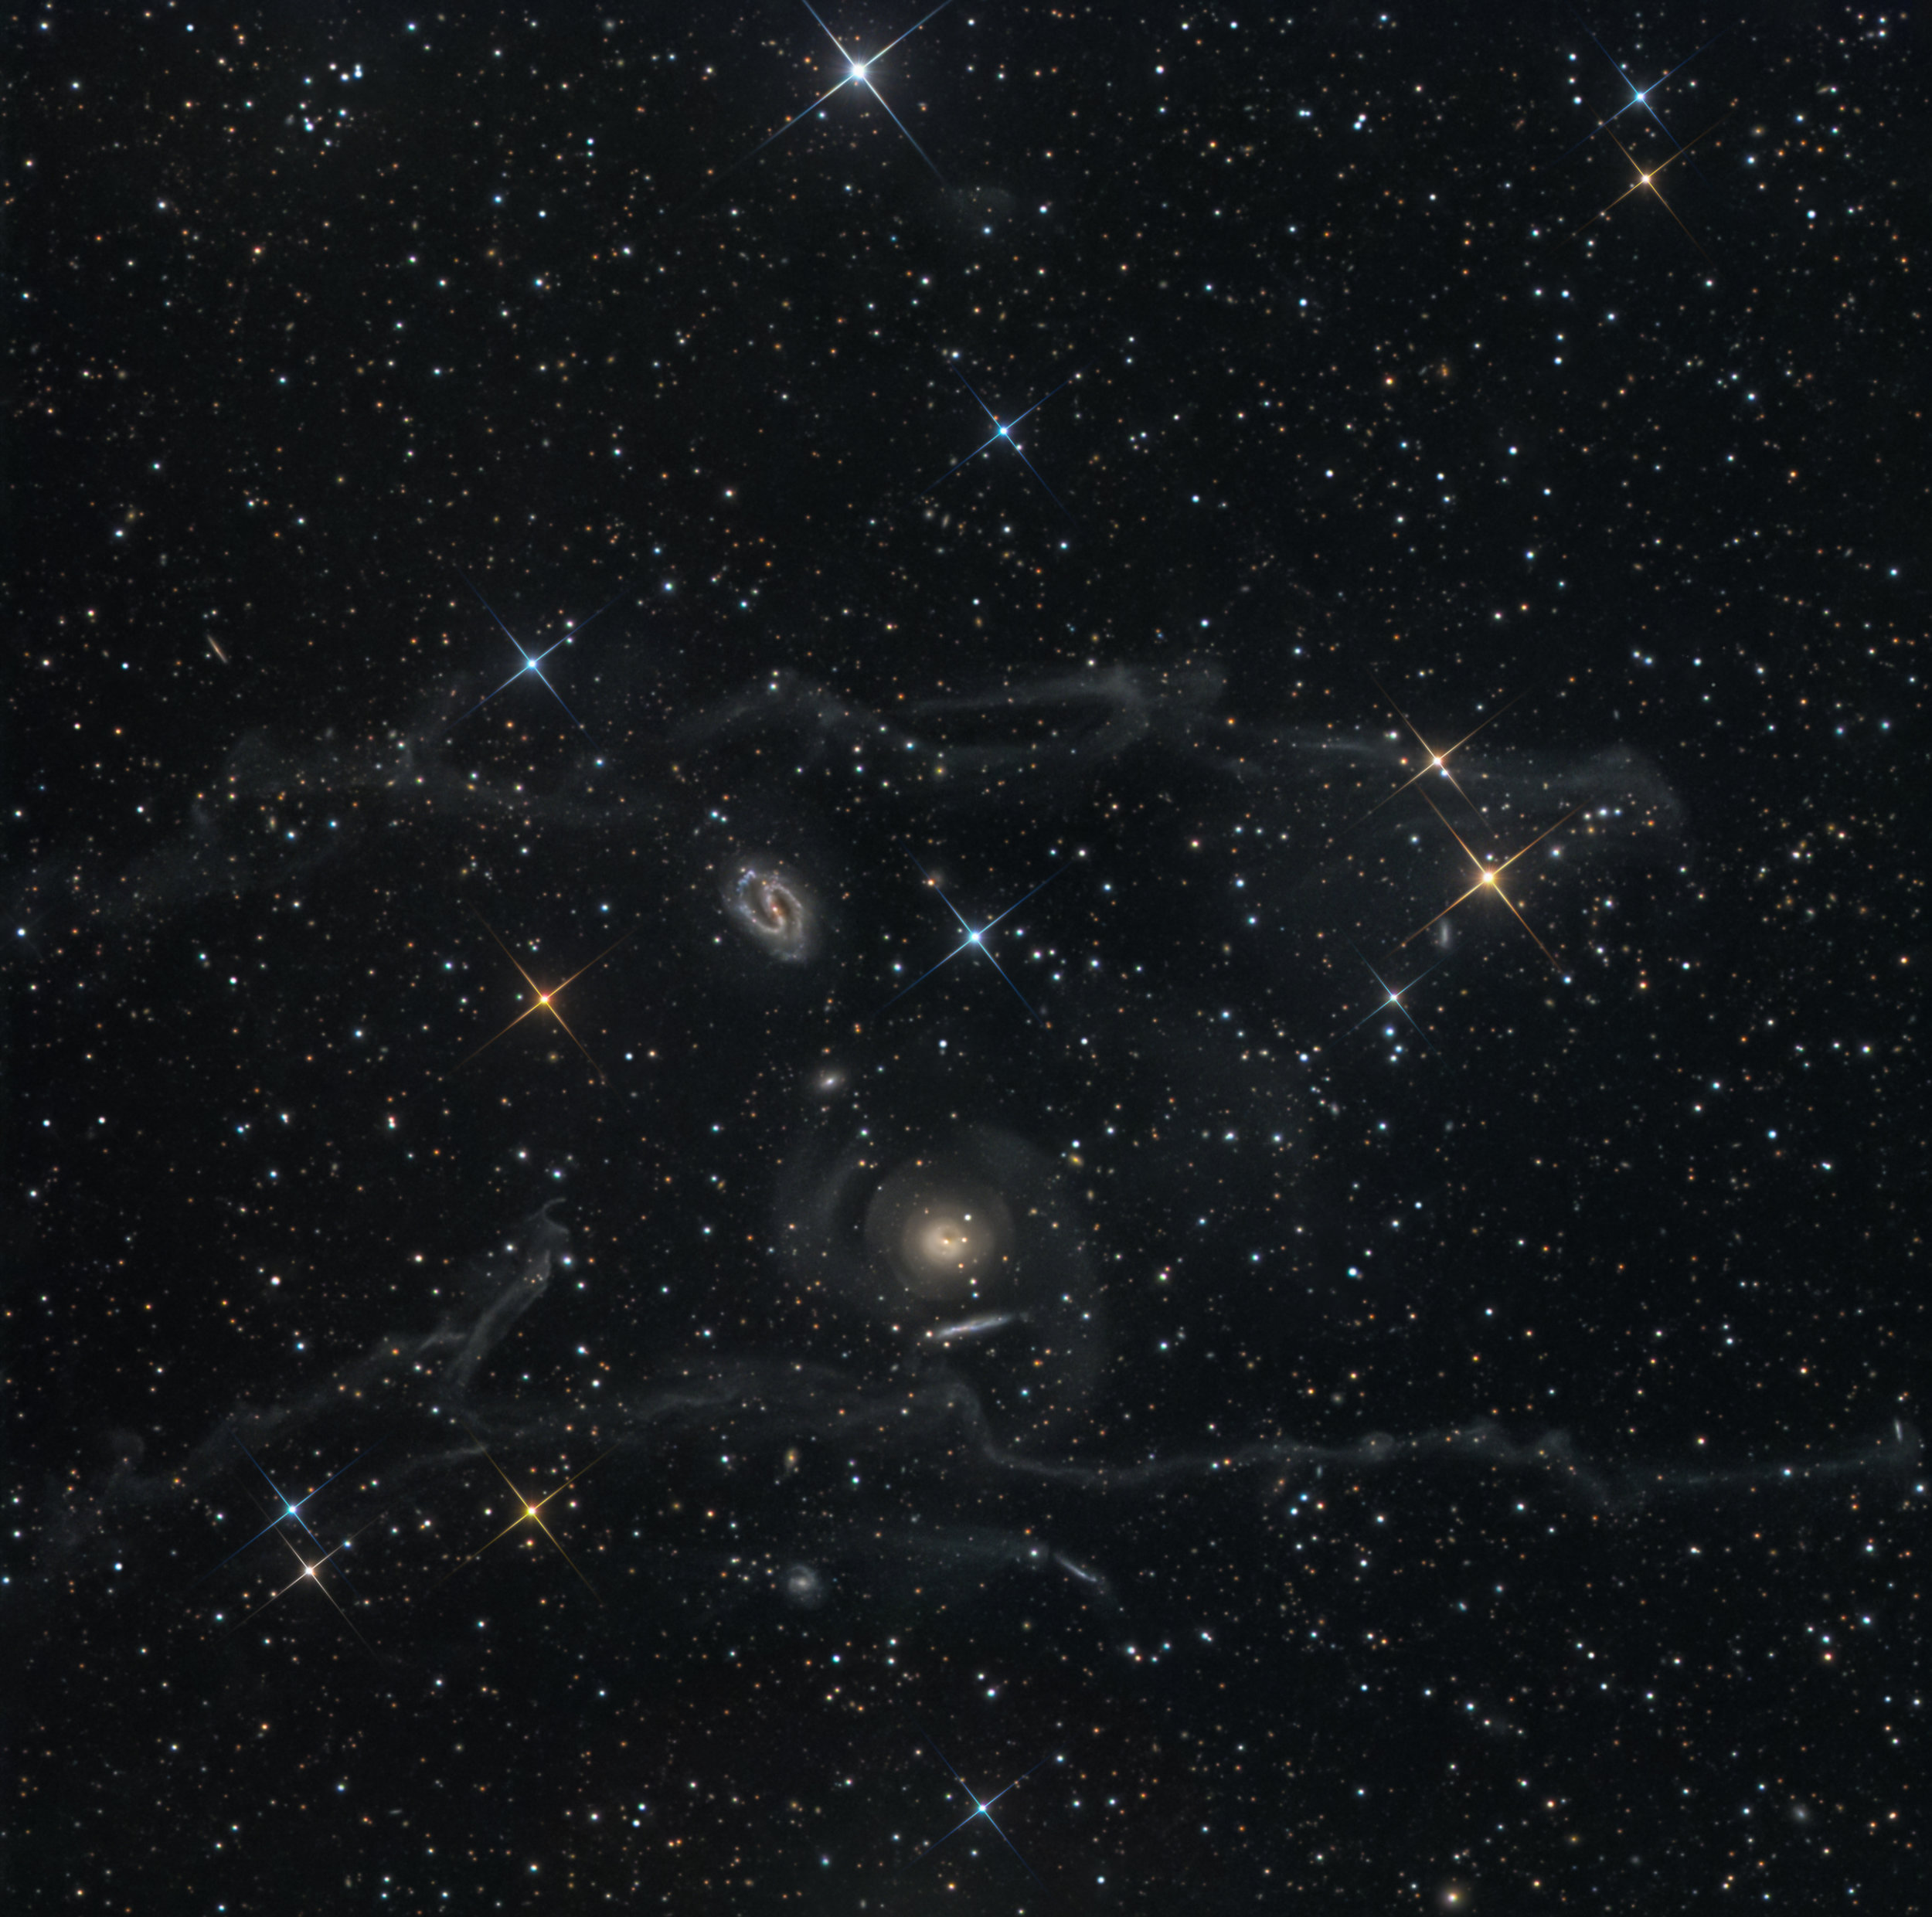 NGC 2634 from (Stellar Winds Observatory-DSNM)